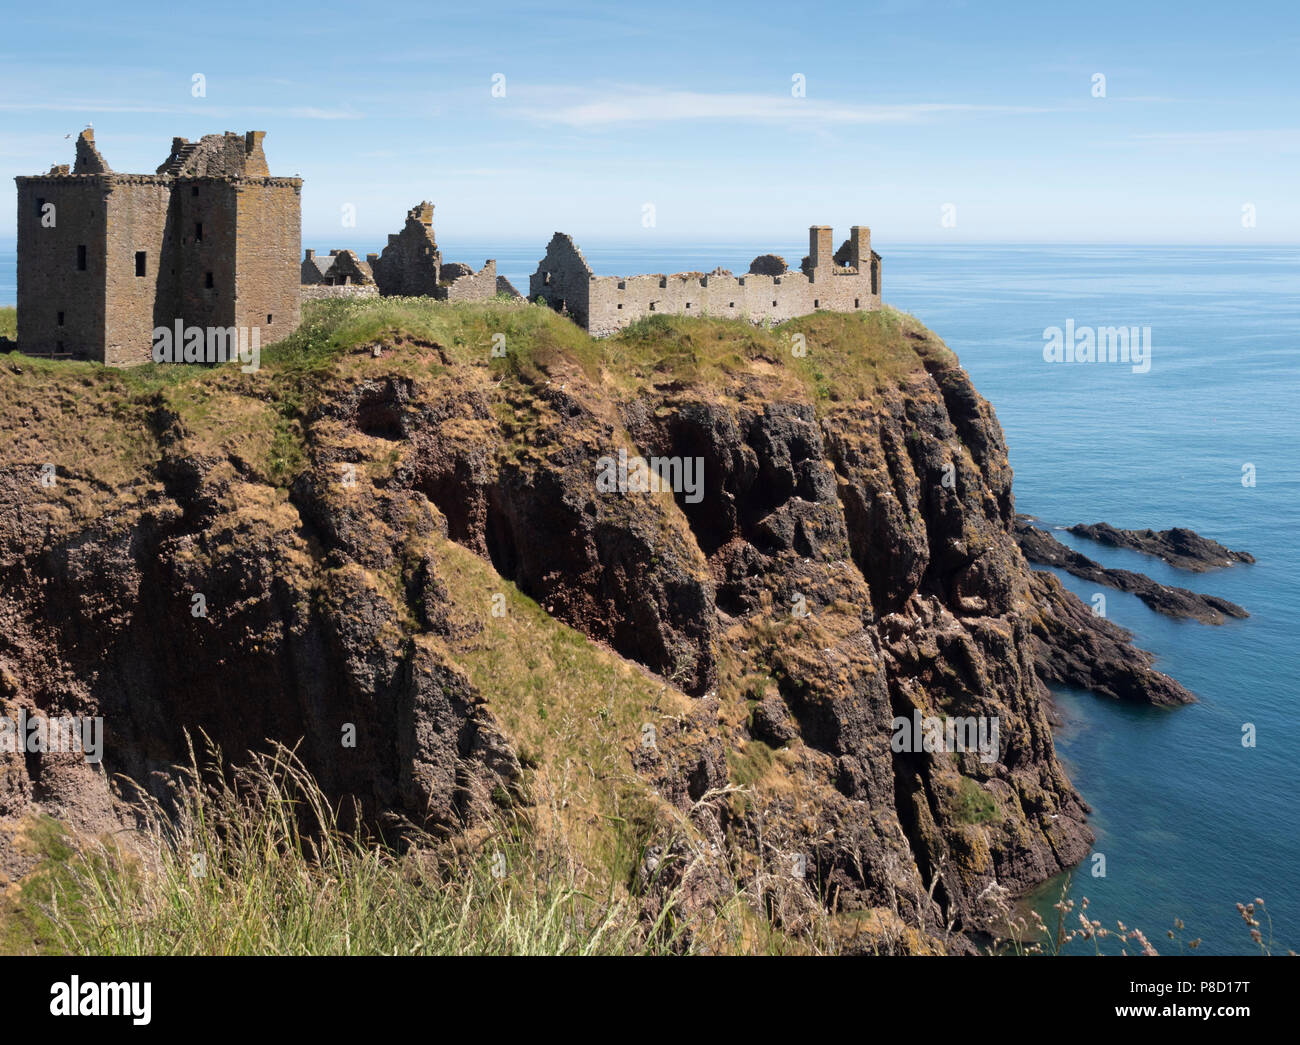 Dunottar Castle, Stonehaven, Aberdeenshire - one of Scotland's most identifiable strongholds, built in the 15th and 1y6th centuries. Stock Photo